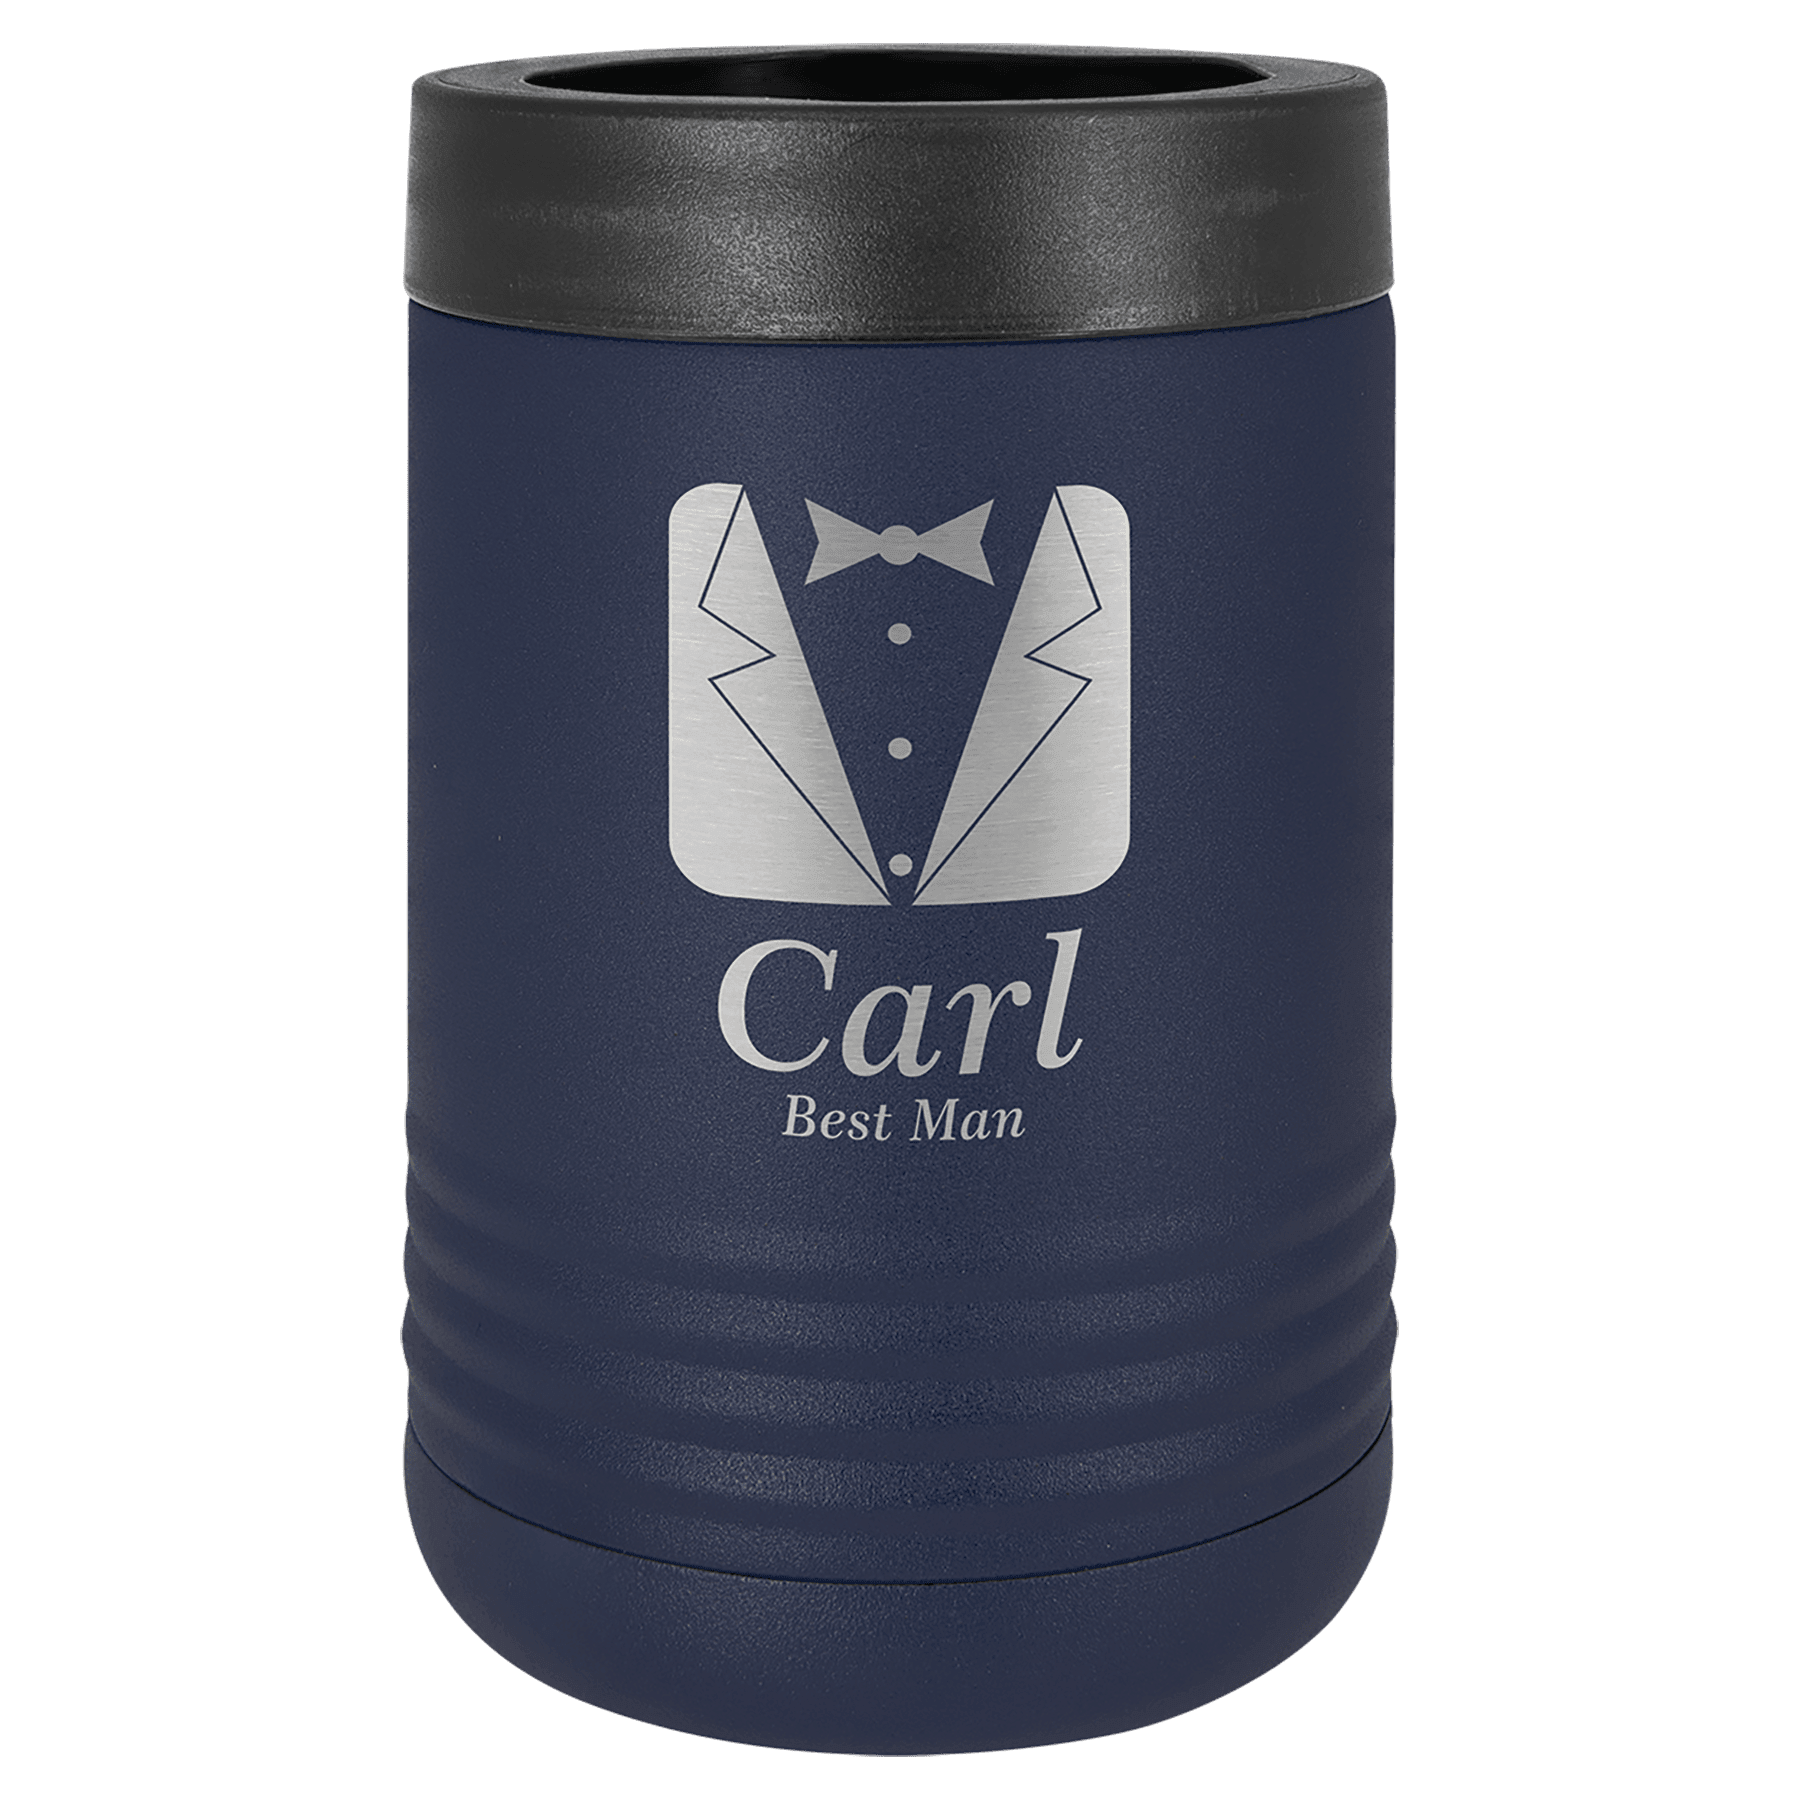 Standard Vacuum Insulated Beverage Holder with Custom Engraving by Polar Camel - The Rutile Ltd